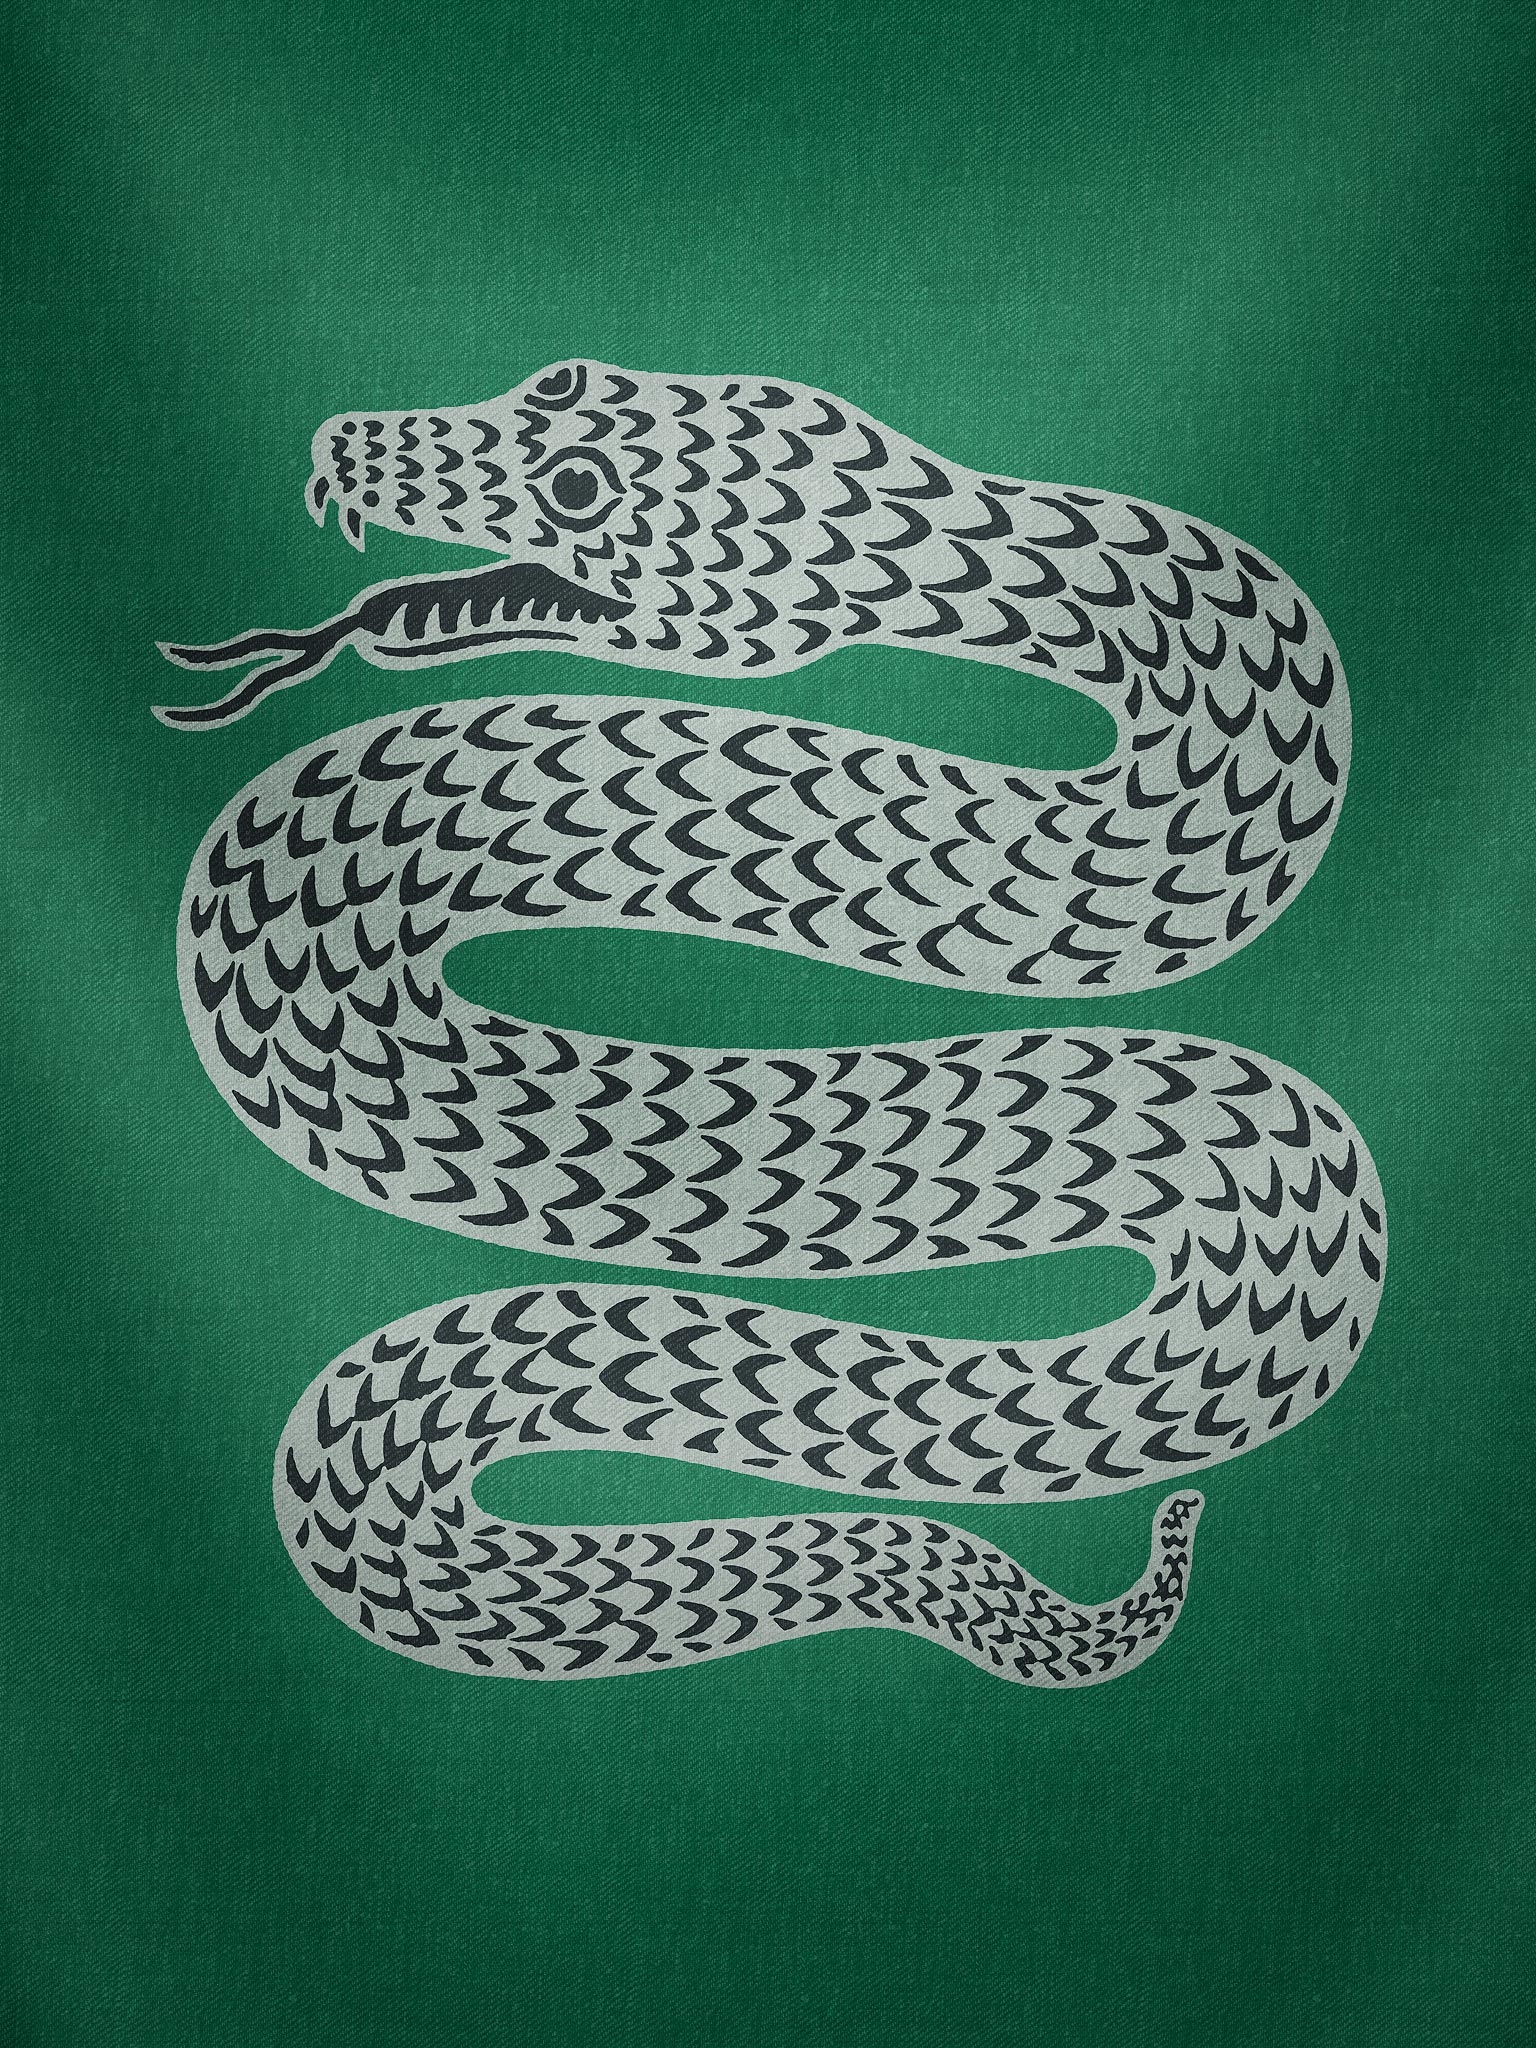 Slytherin Iphone Wallpaper Slytherin Iphone Wallpaper - Slytherin House , HD Wallpaper & Backgrounds